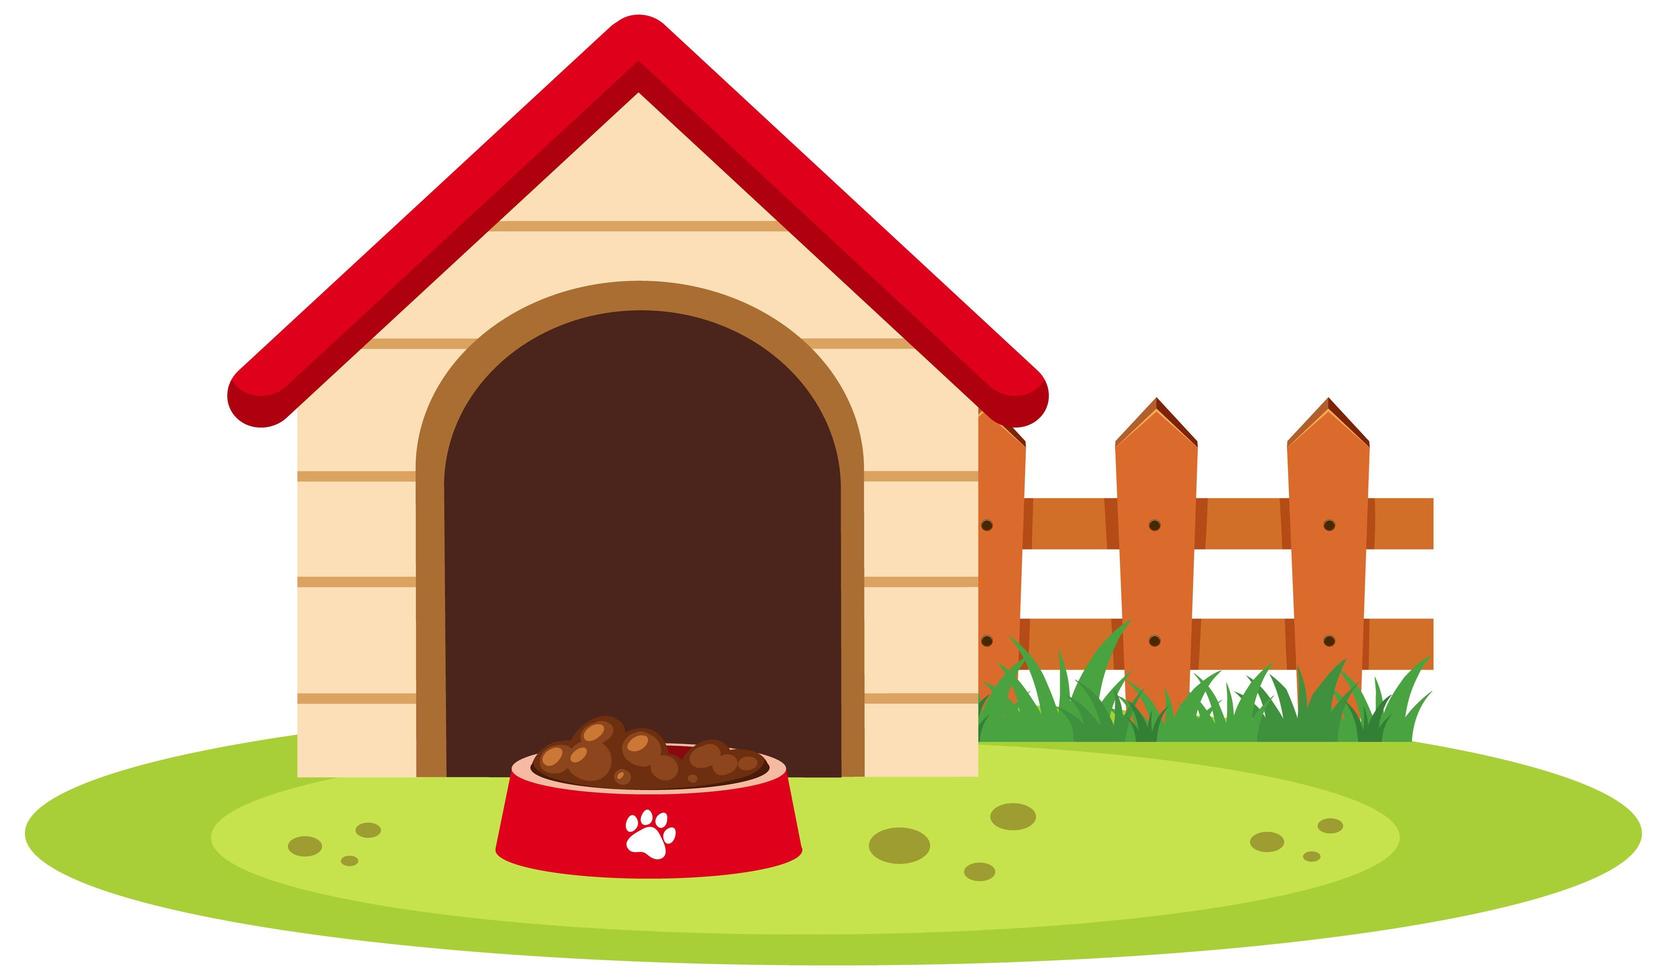 Dog house with food bowl isolated on white background vector